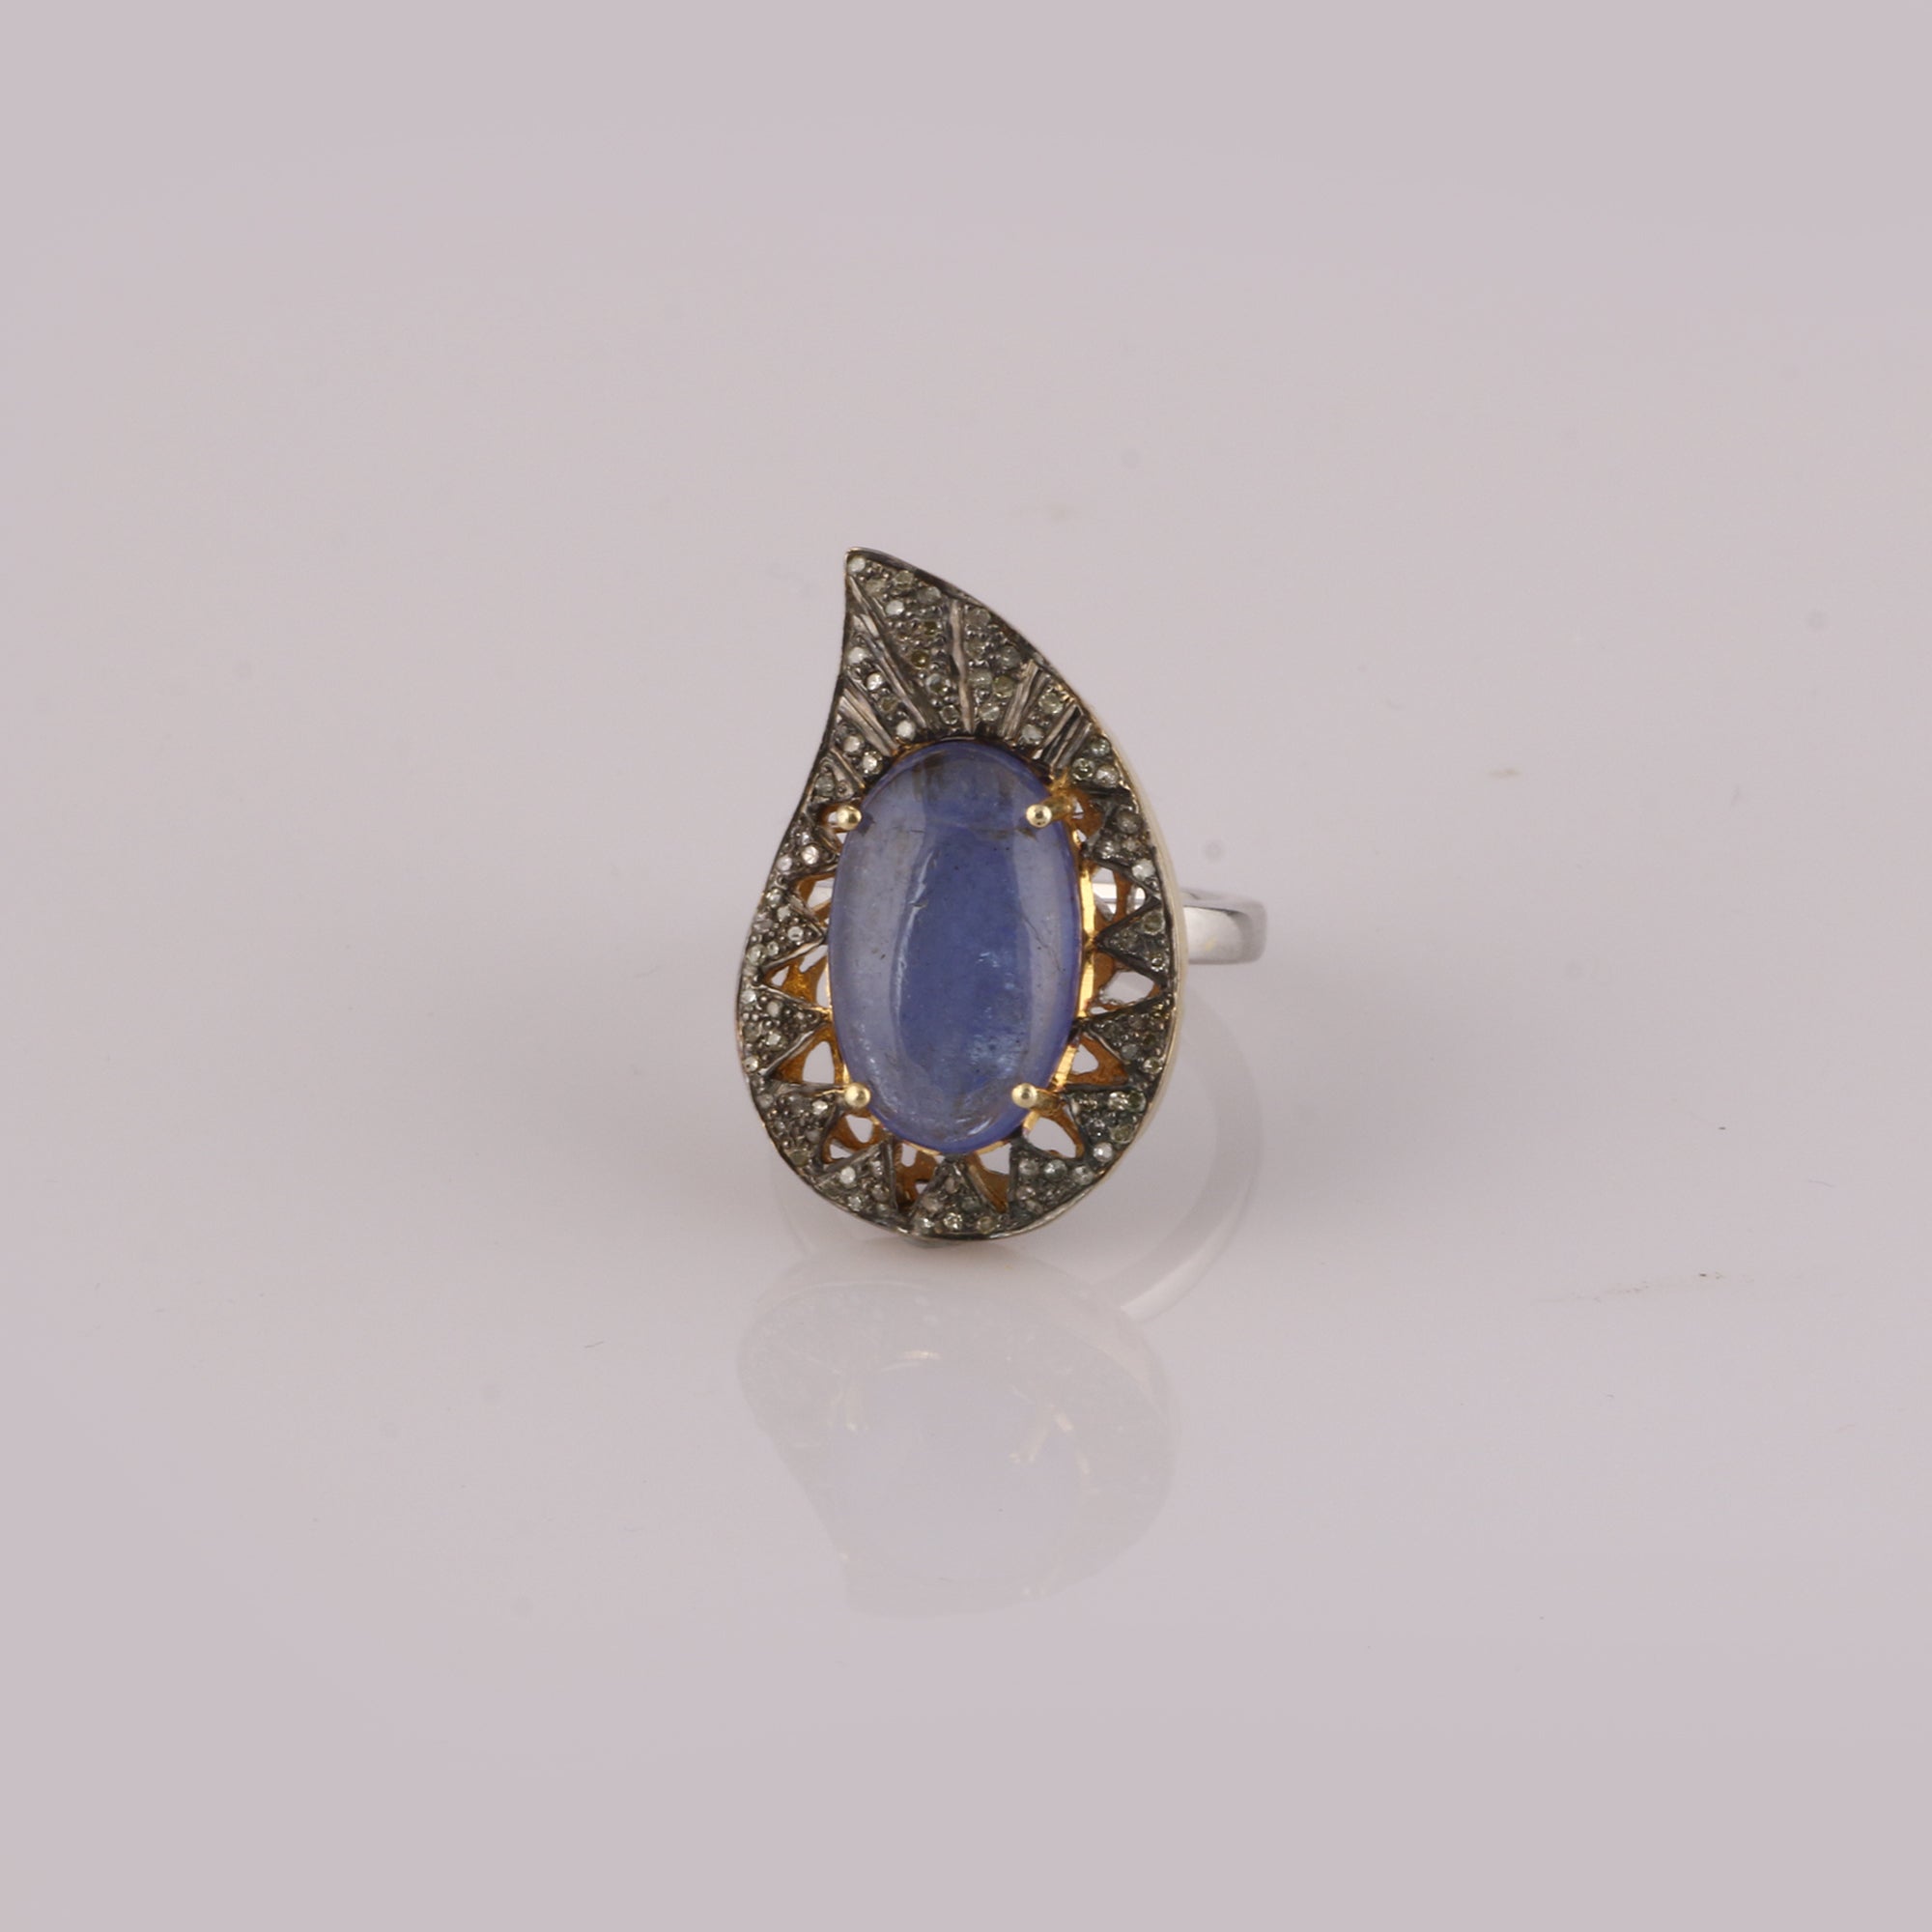 Item details:-

✦ SKU:- ESRG00238

✦ Material :- 925 Sterling Silver
✦ Gemstone Specification:-
✧ Diamond
✧ Tanzanite

✦ Approx. Diamond Weight : 0.4
✦ Approx. Silver Weight : 7.89
✦ Approx. Gross Weight : 9.4

Ring Size (US): 6

You will Get the